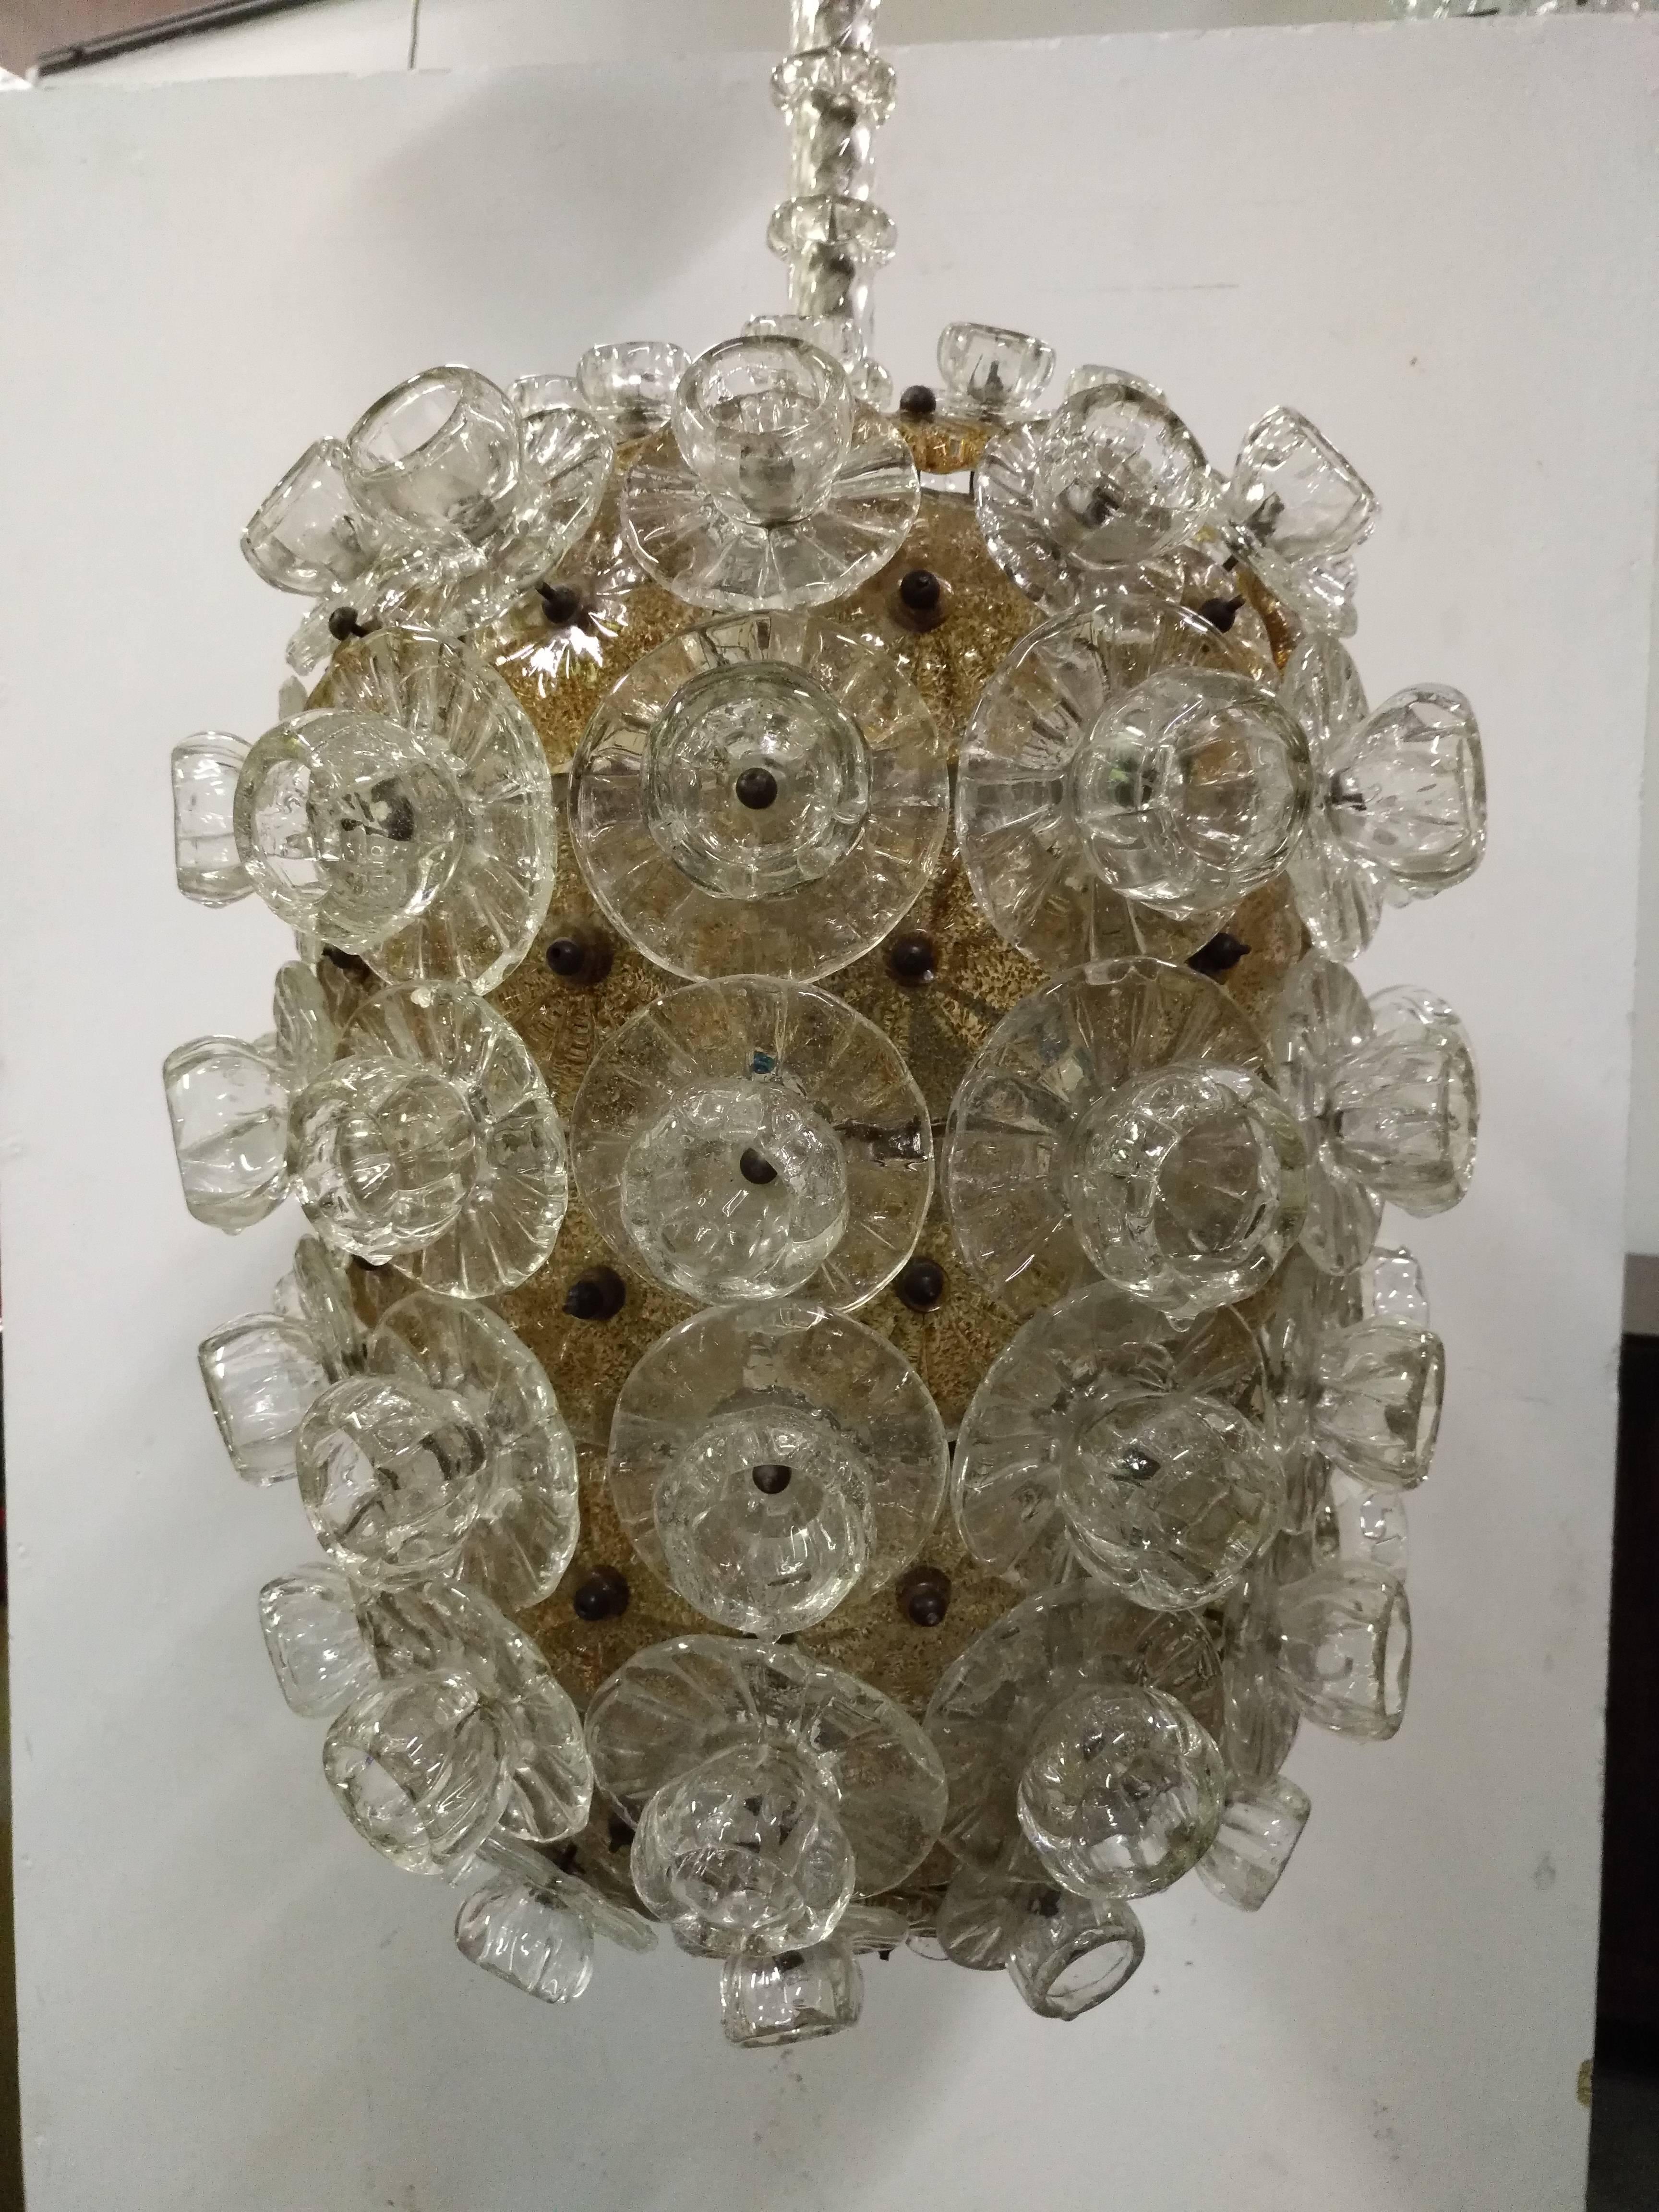 Beautiful chandelier with blown glass plates with flacks of gold and white flowers in different dimensions
Very old and beautiful manufacturing by Barovier Venice, Murano, 1940
Measures: The lantern is cm 65 H.